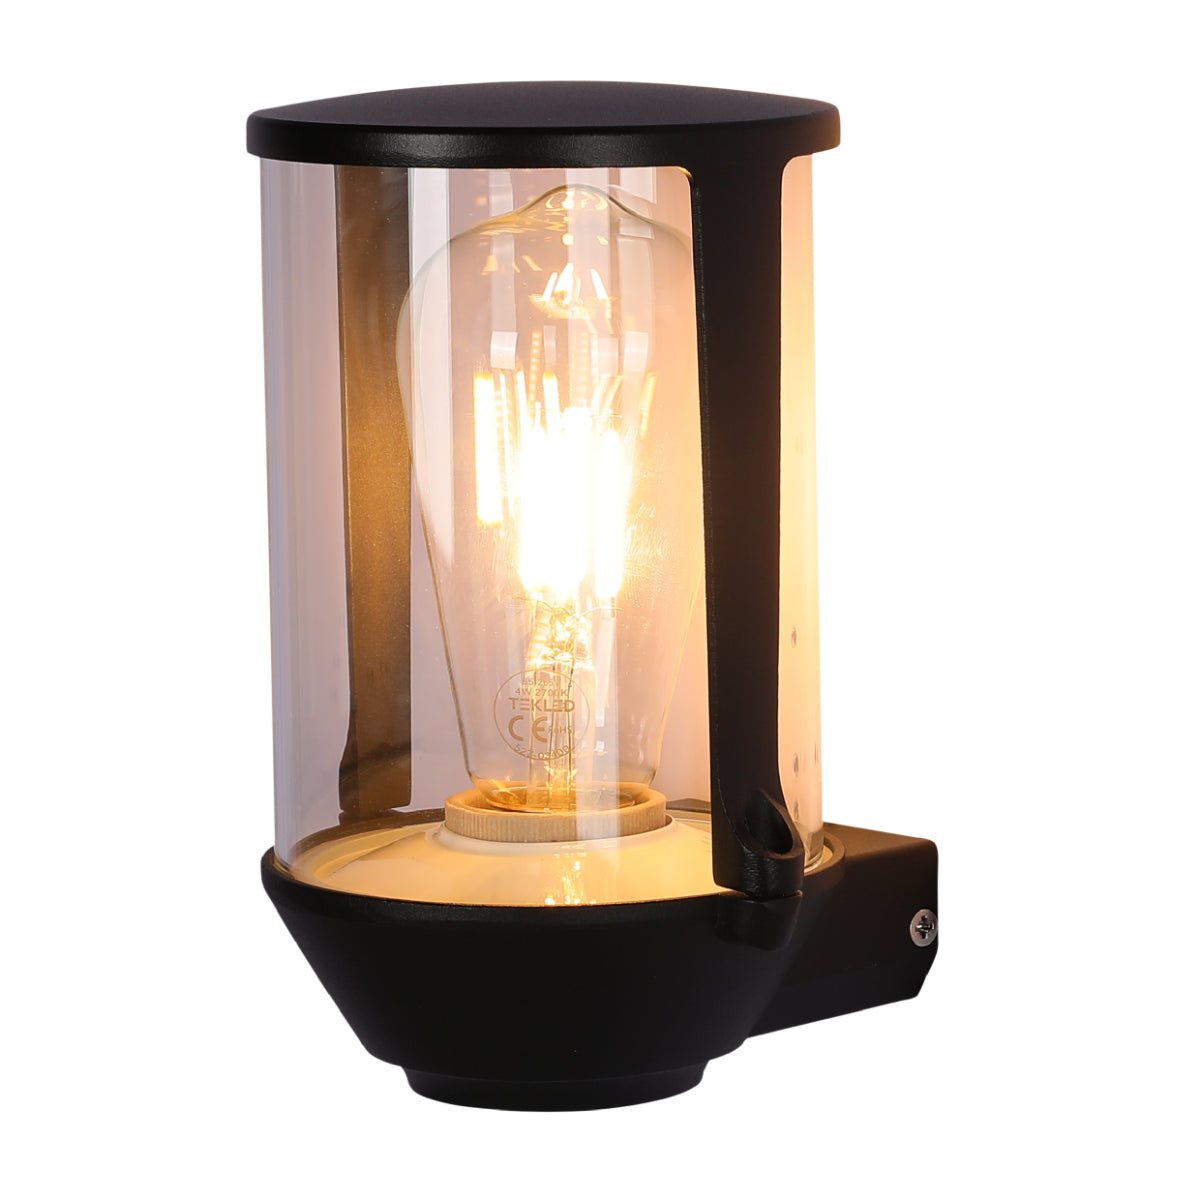 Main image of Lux Vintage Classic Outdoor Wall Light Sconce IP54 Black 182-03423